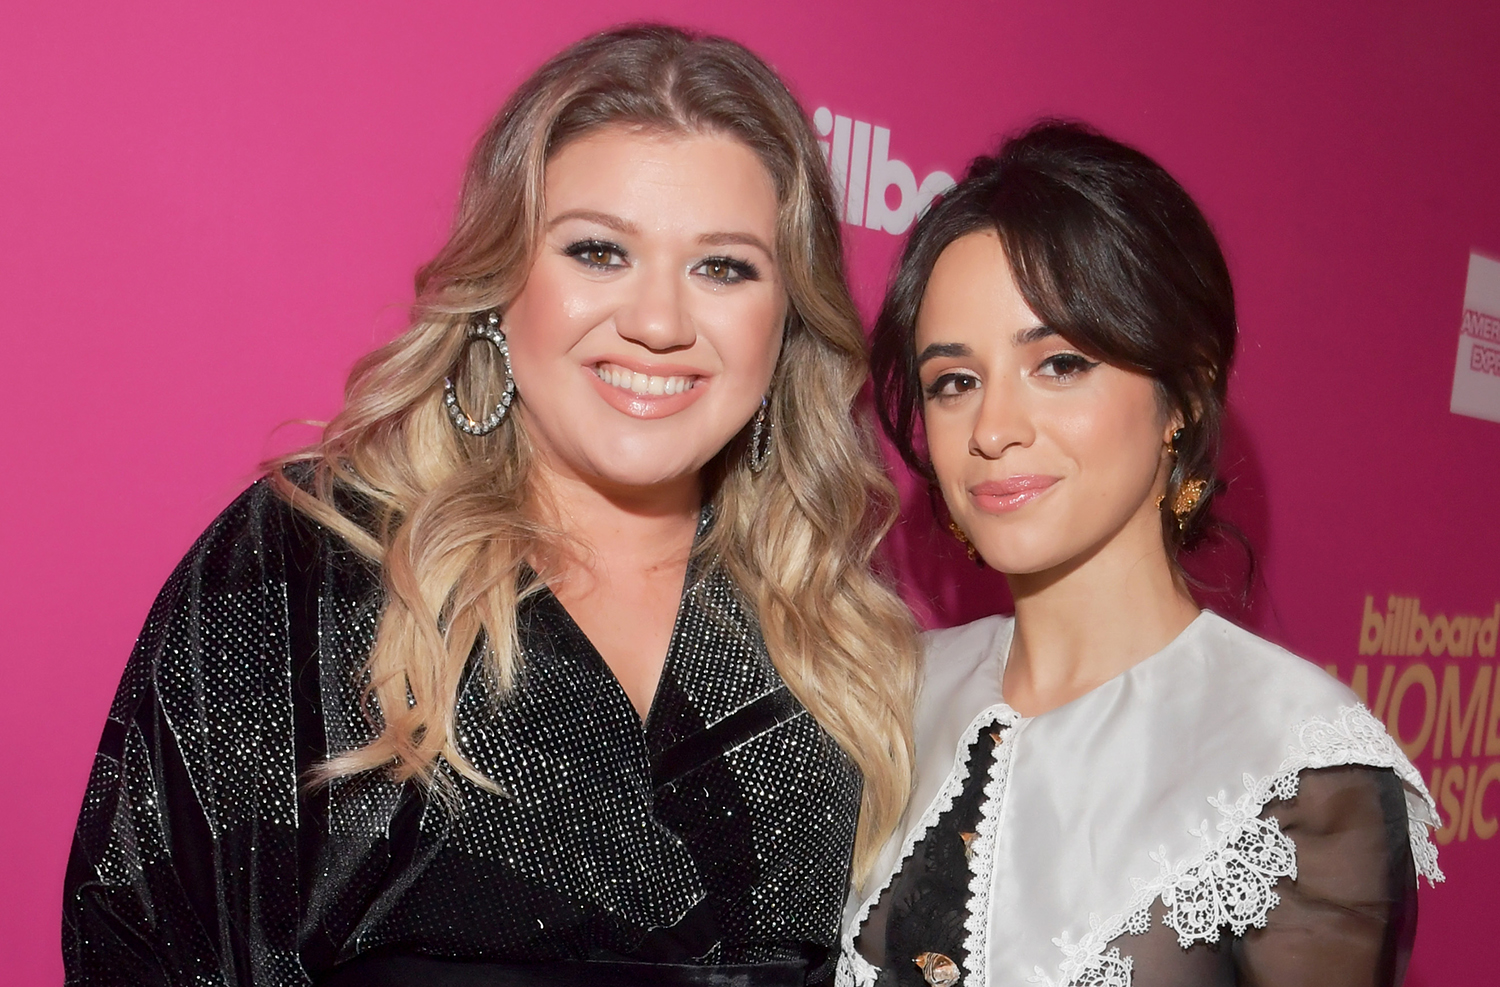 Former The Voice coach Kelly Clarkson and new coach Camila Cabello pose together at Billboard Women In Music 2017